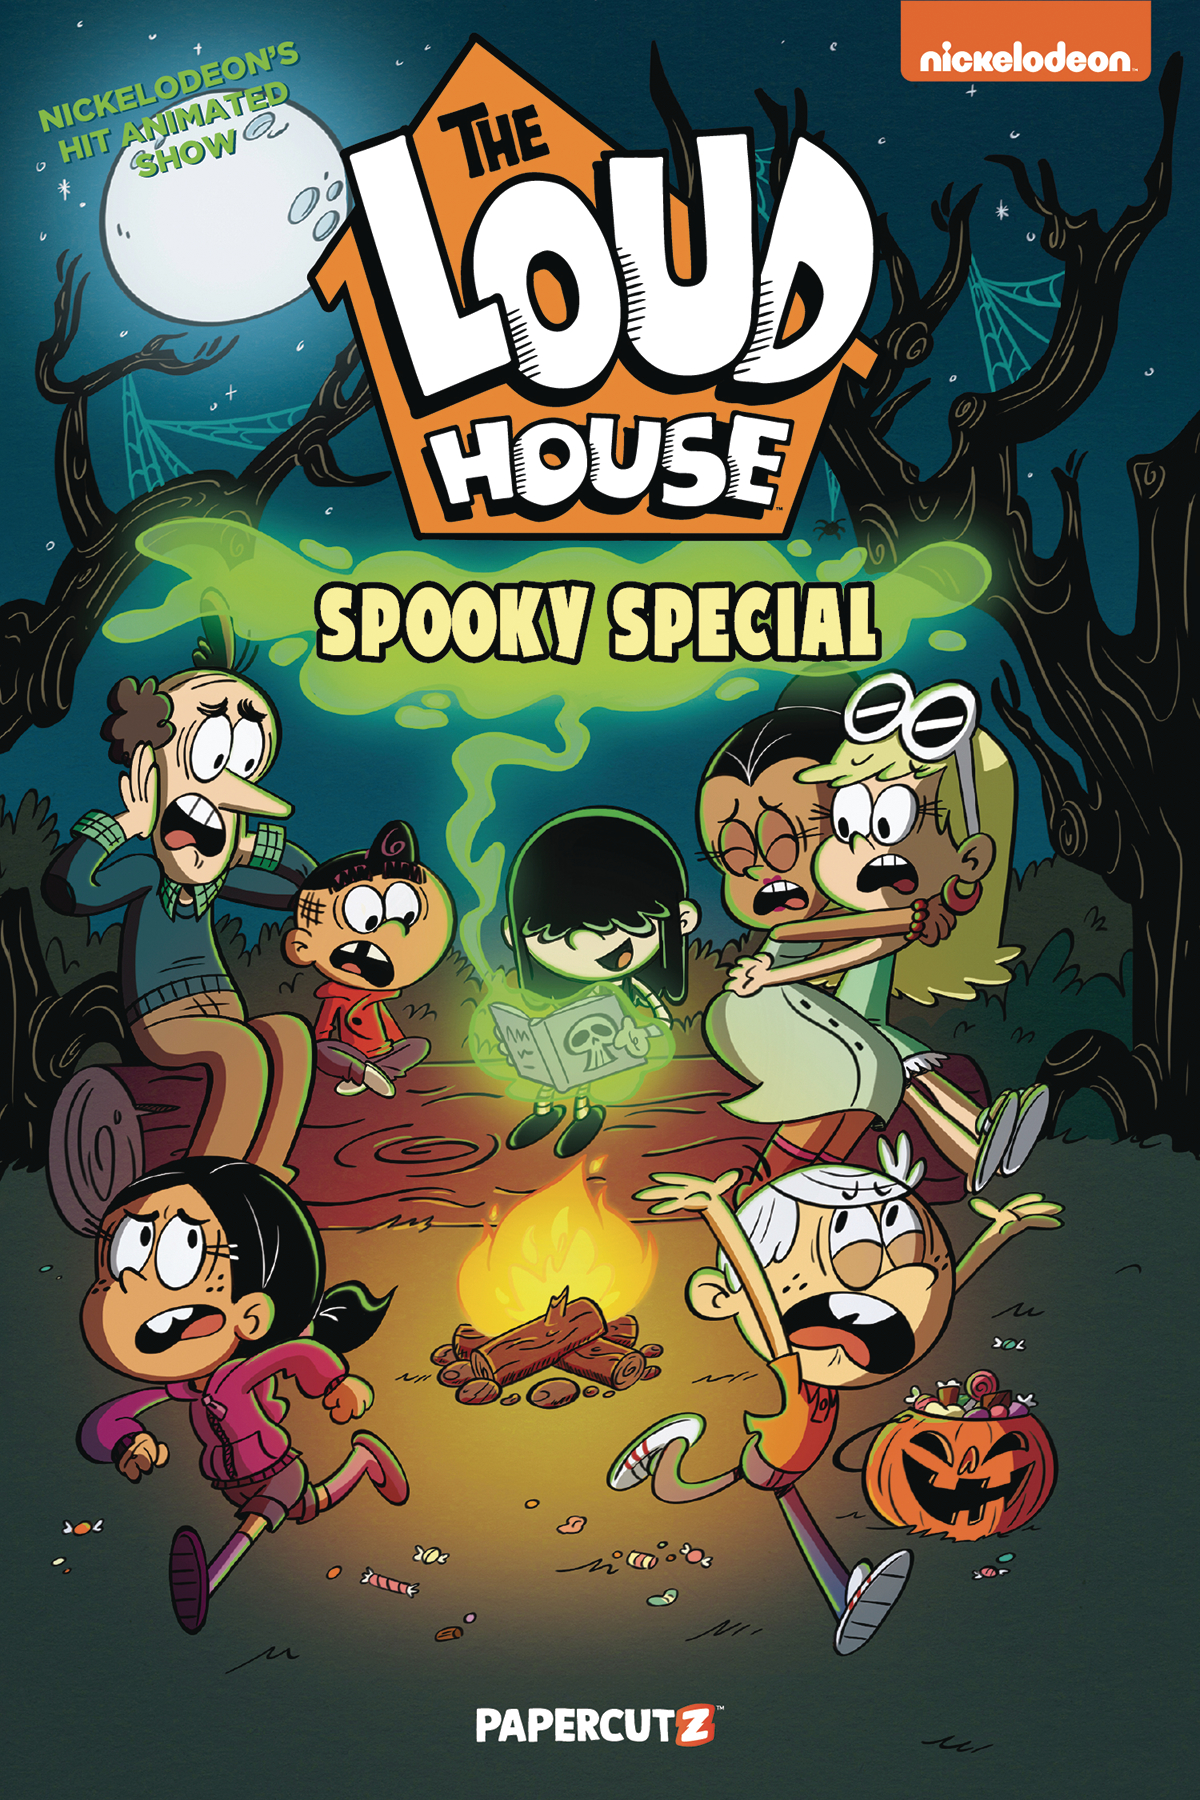 Loud House Spooky Special Graphic Novel